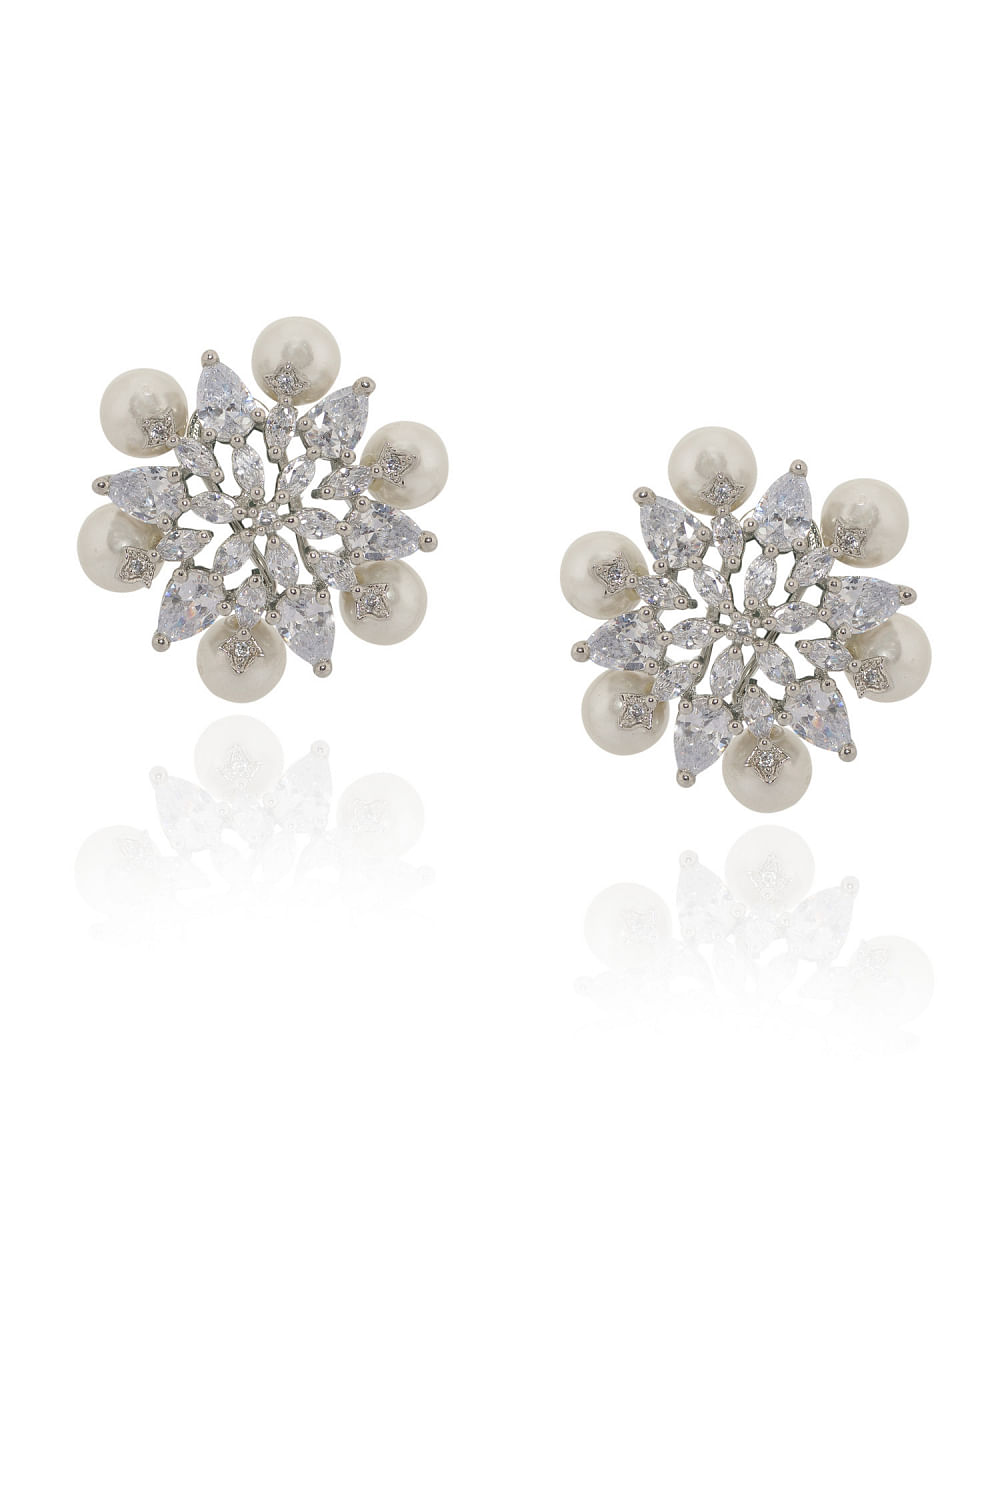 Buy Silver Plated Polki And Swarovski Crystals Faux Diamond Earrings by Do  Taara Online at Aza Fashions.